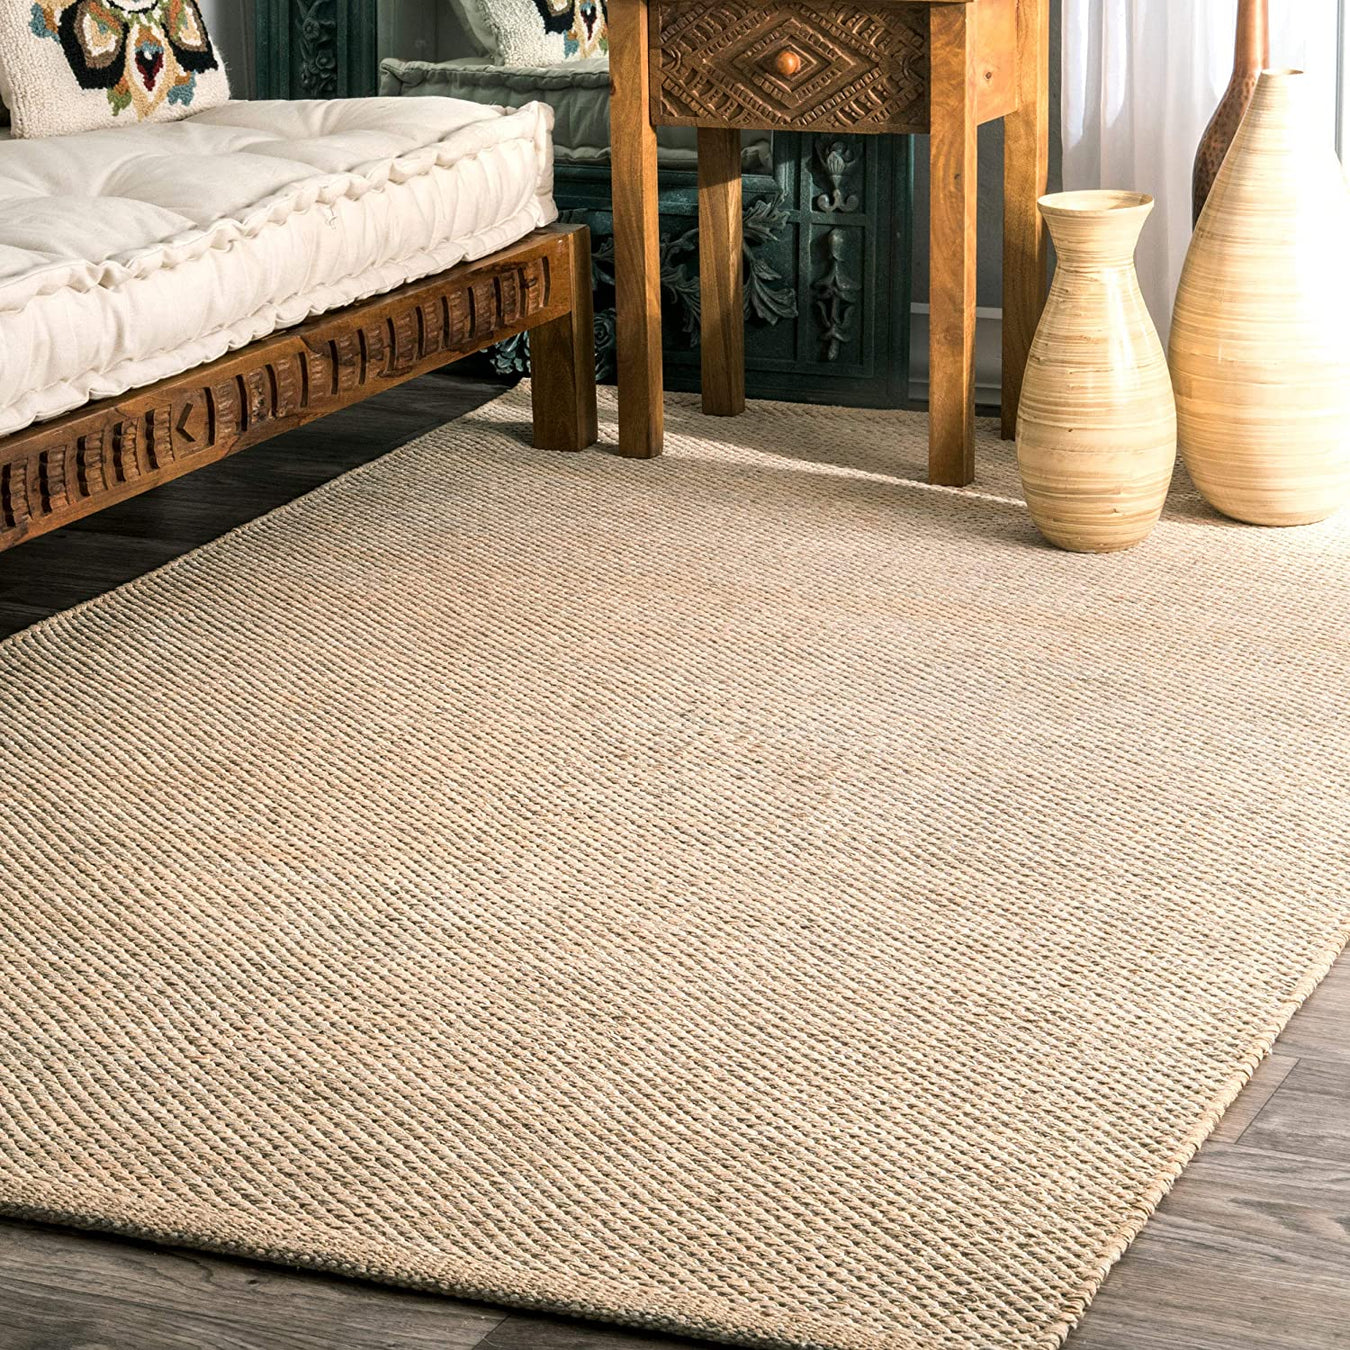 6' x 9' Area Rugs